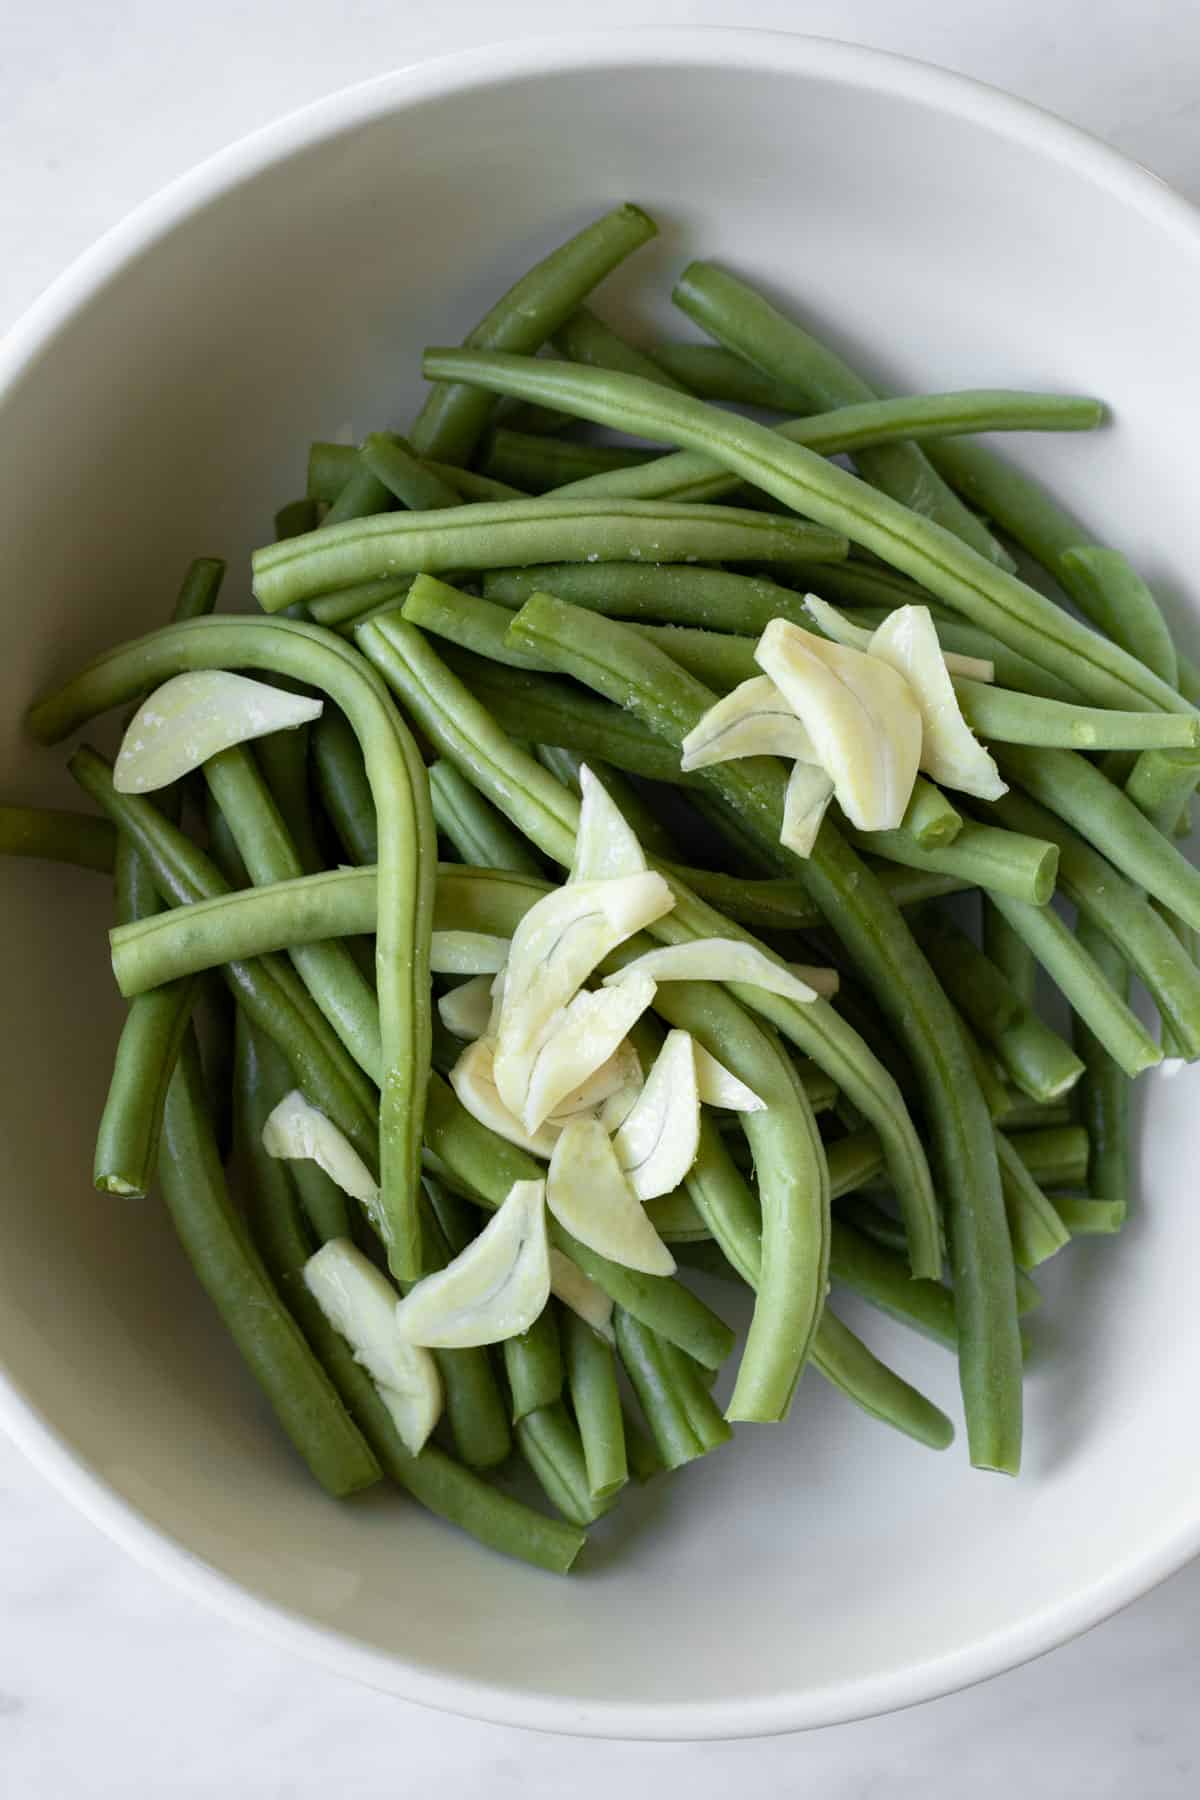 tossing green beans with garlic and oil in a large bowl.